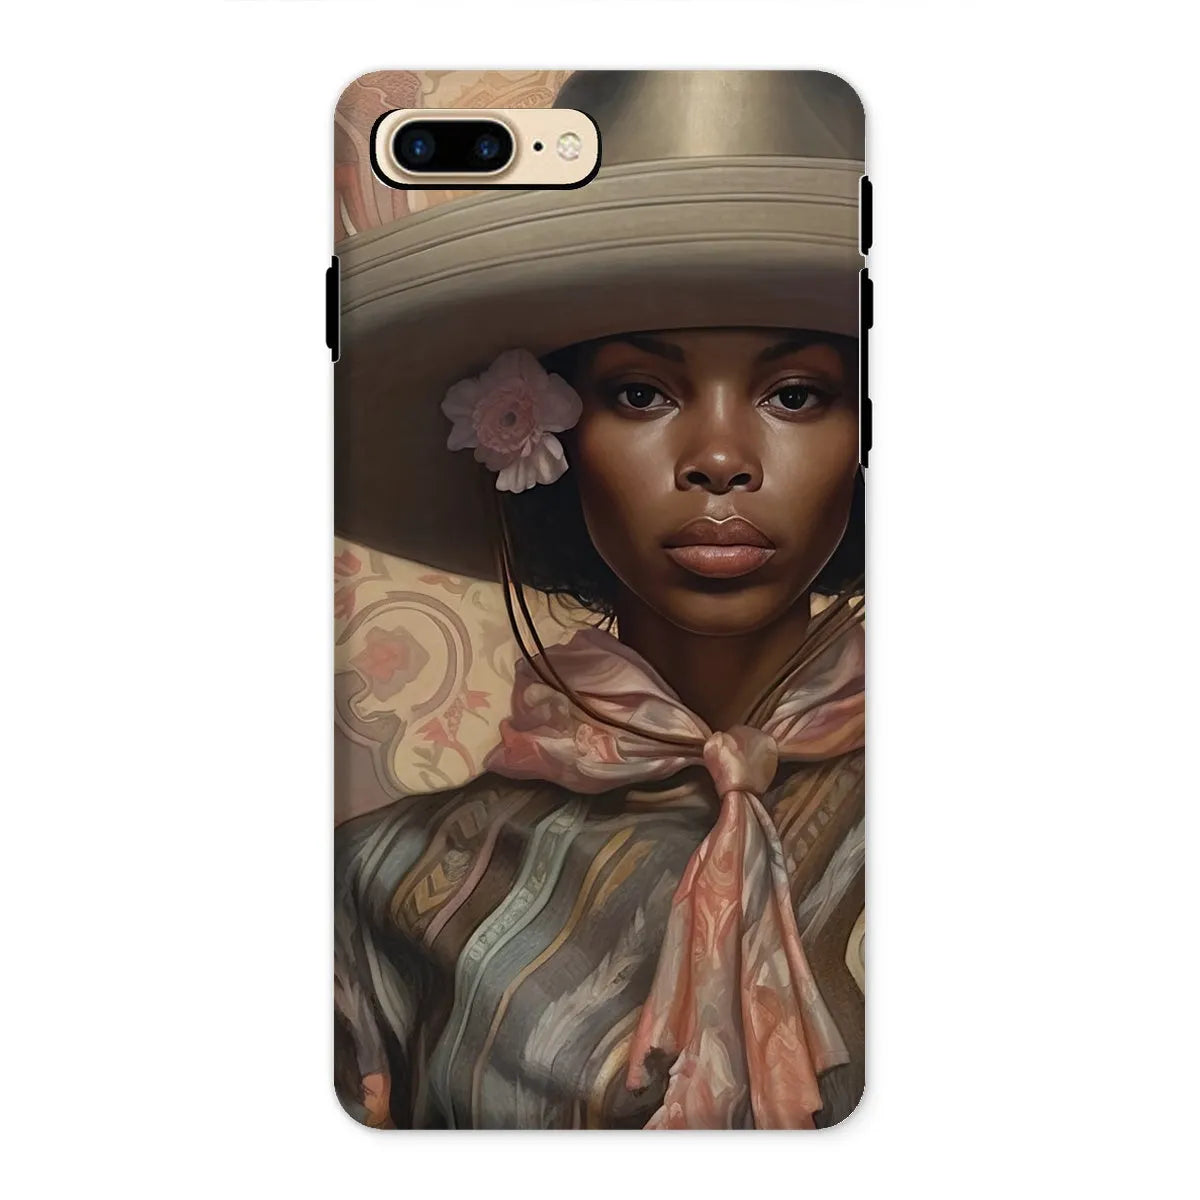 Sadie The Lesbian Cowgirl - Sapphic Art Phone Case - Iphone 8 Plus / Matte - Mobile Phone Cases - Aesthetic Art